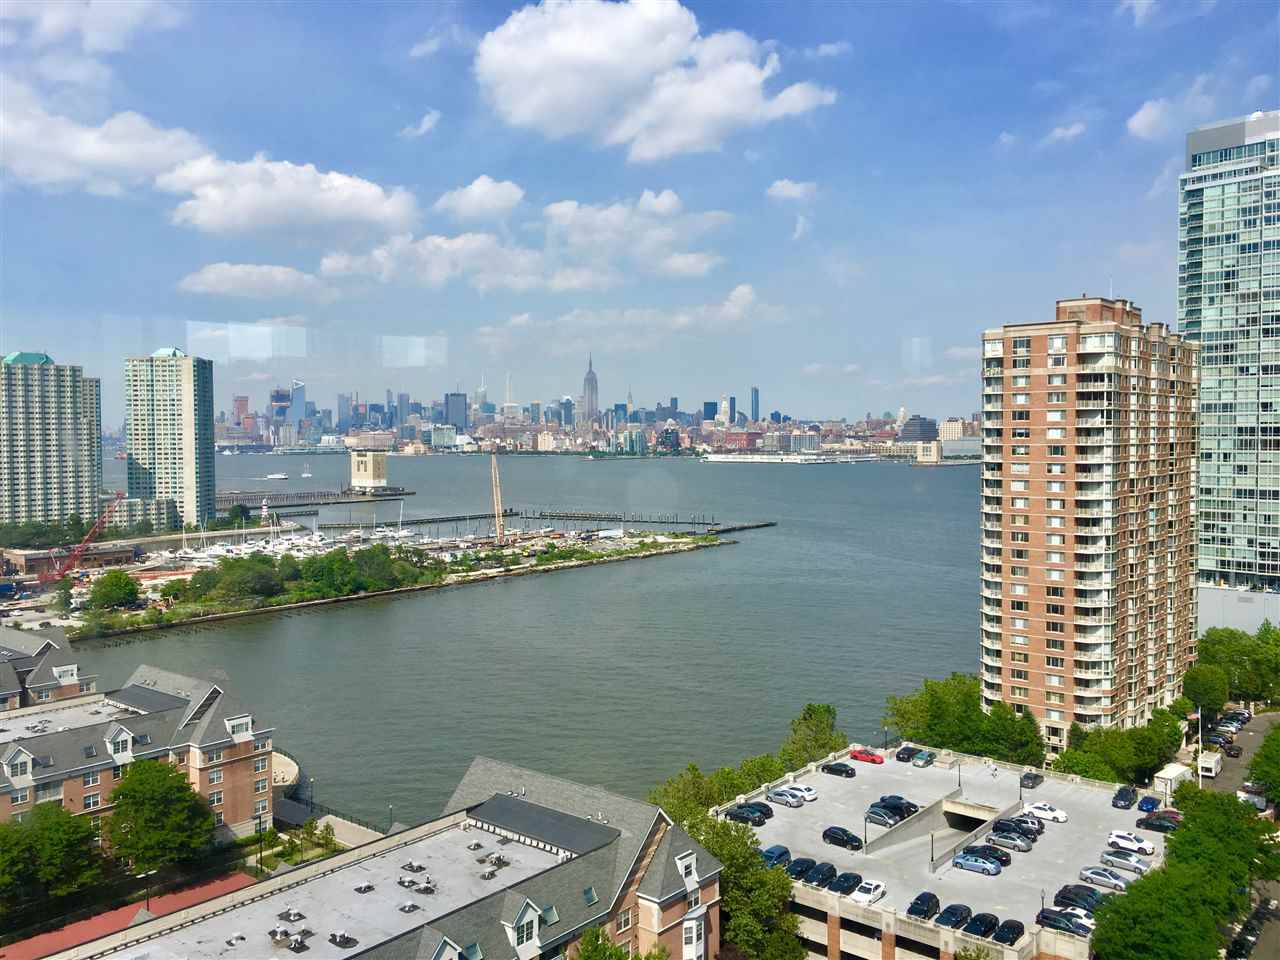 Lovely 2BD/2BA unit at the luxurious Portofino - 2 BR The Waterfront New Jersey